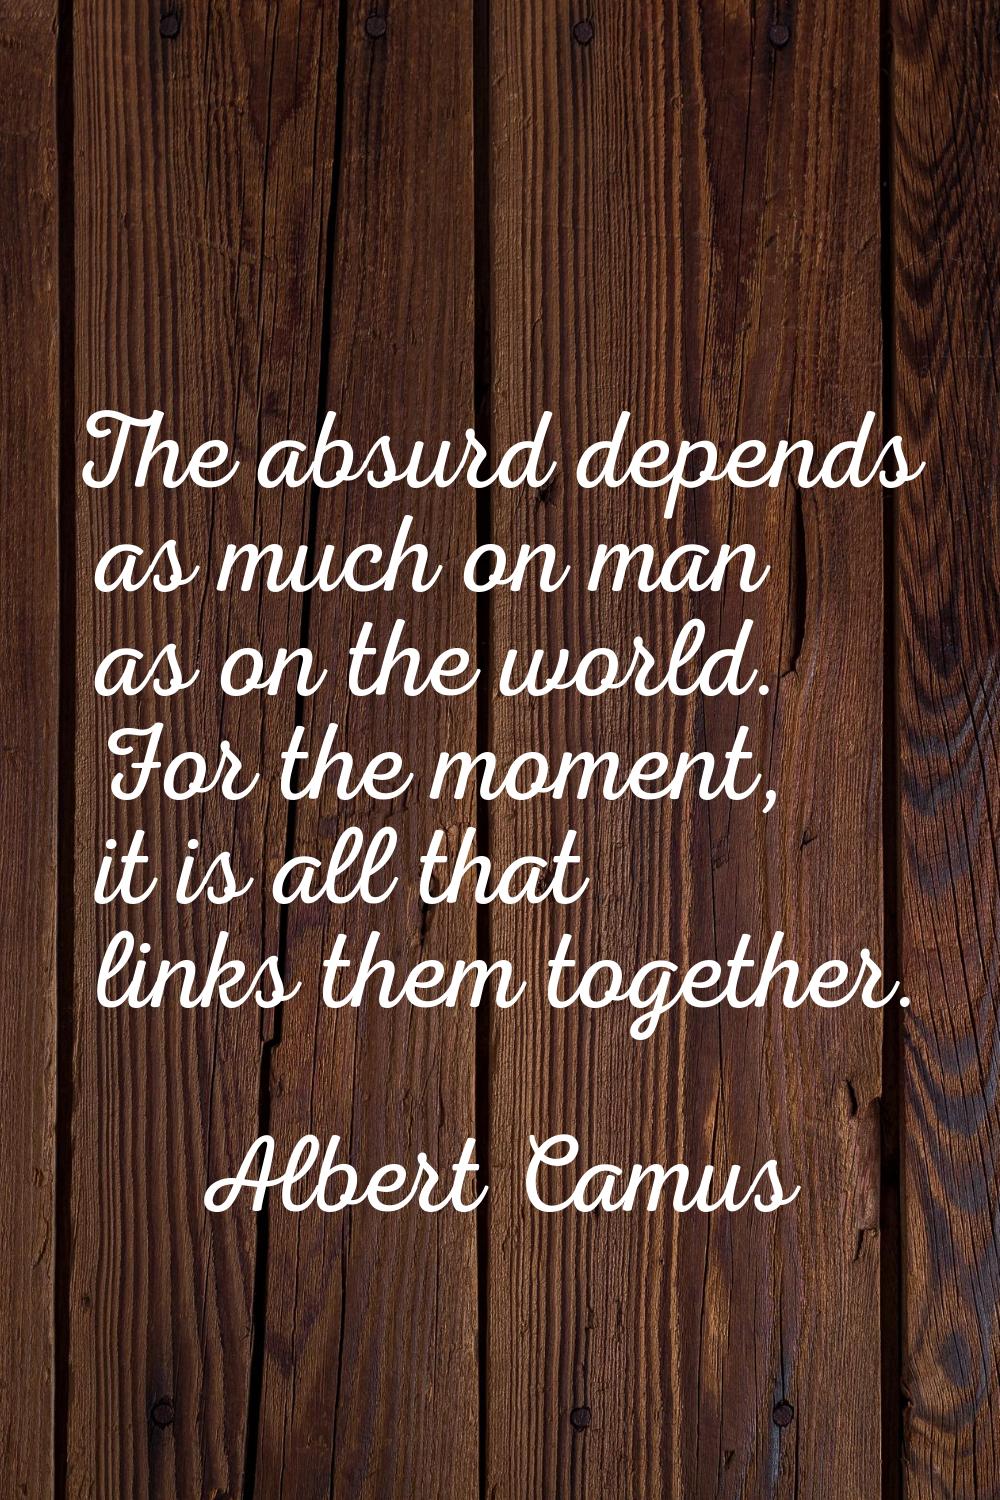 The absurd depends as much on man as on the world. For the moment, it is all that links them togeth